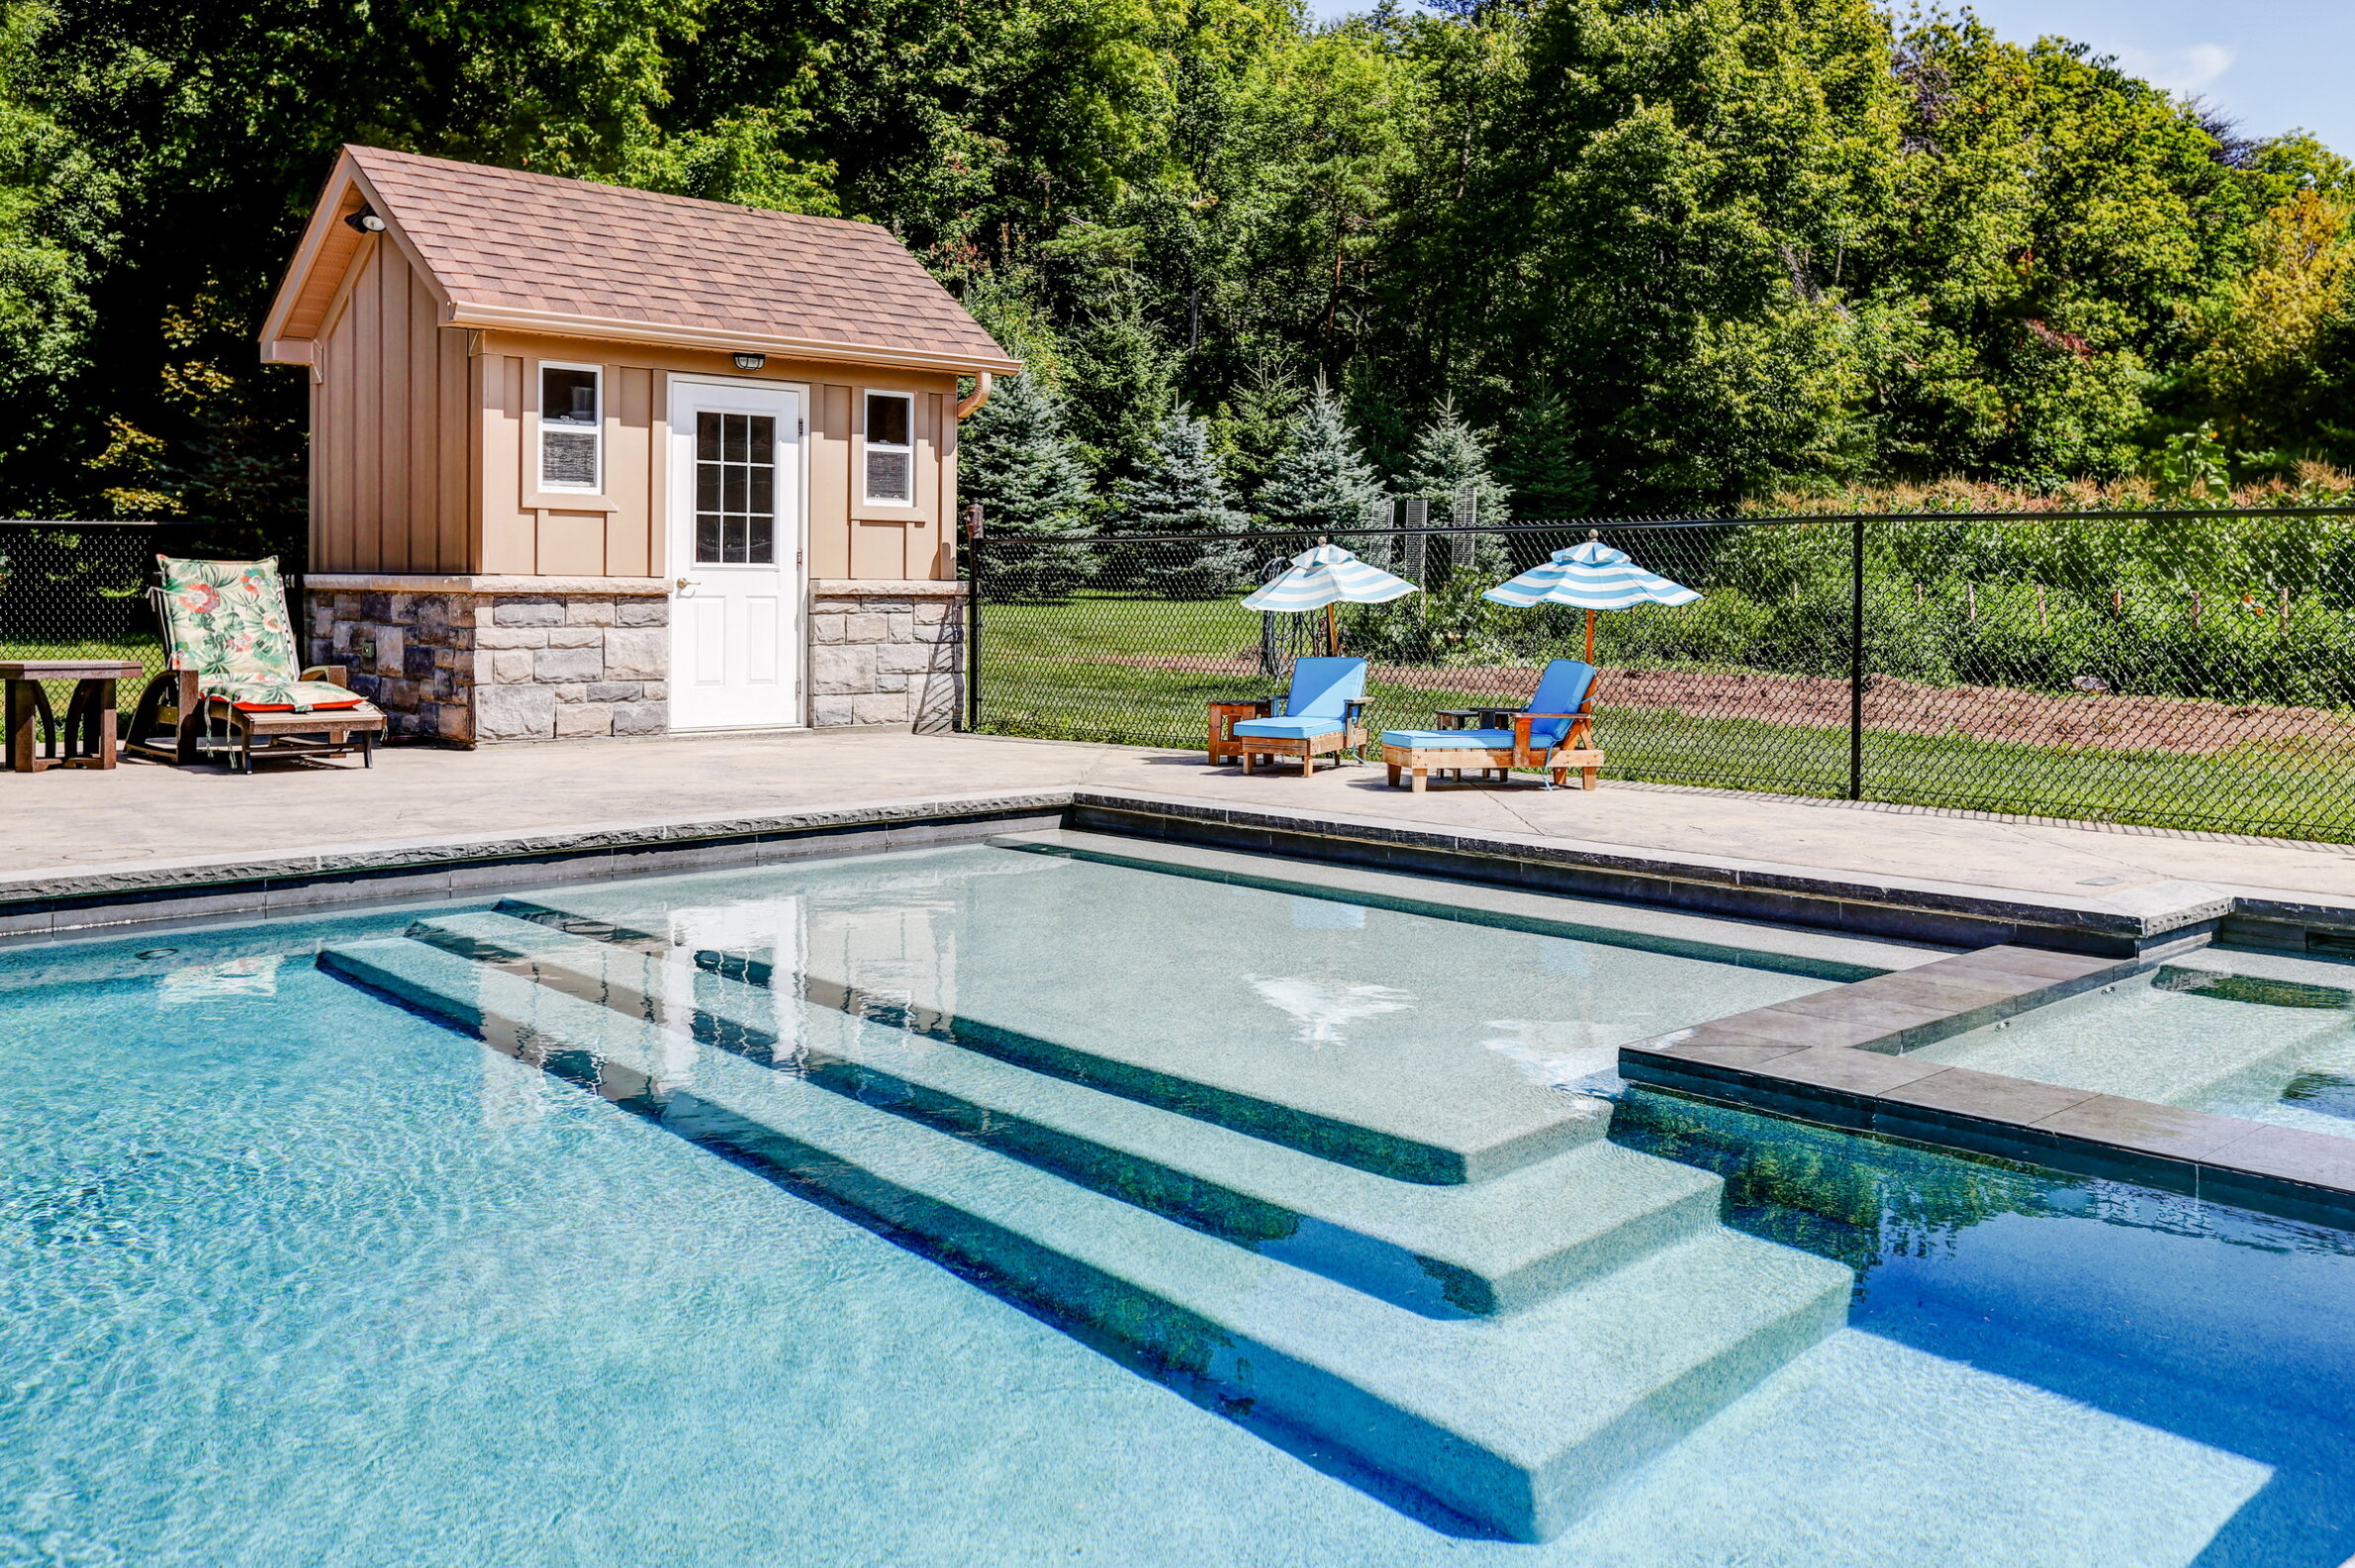 Outdoor swimming pool with clear blue water, steps leading in, surrounded by a patio, lounge chairs, umbrellas, and a small pool house, trees in the background.